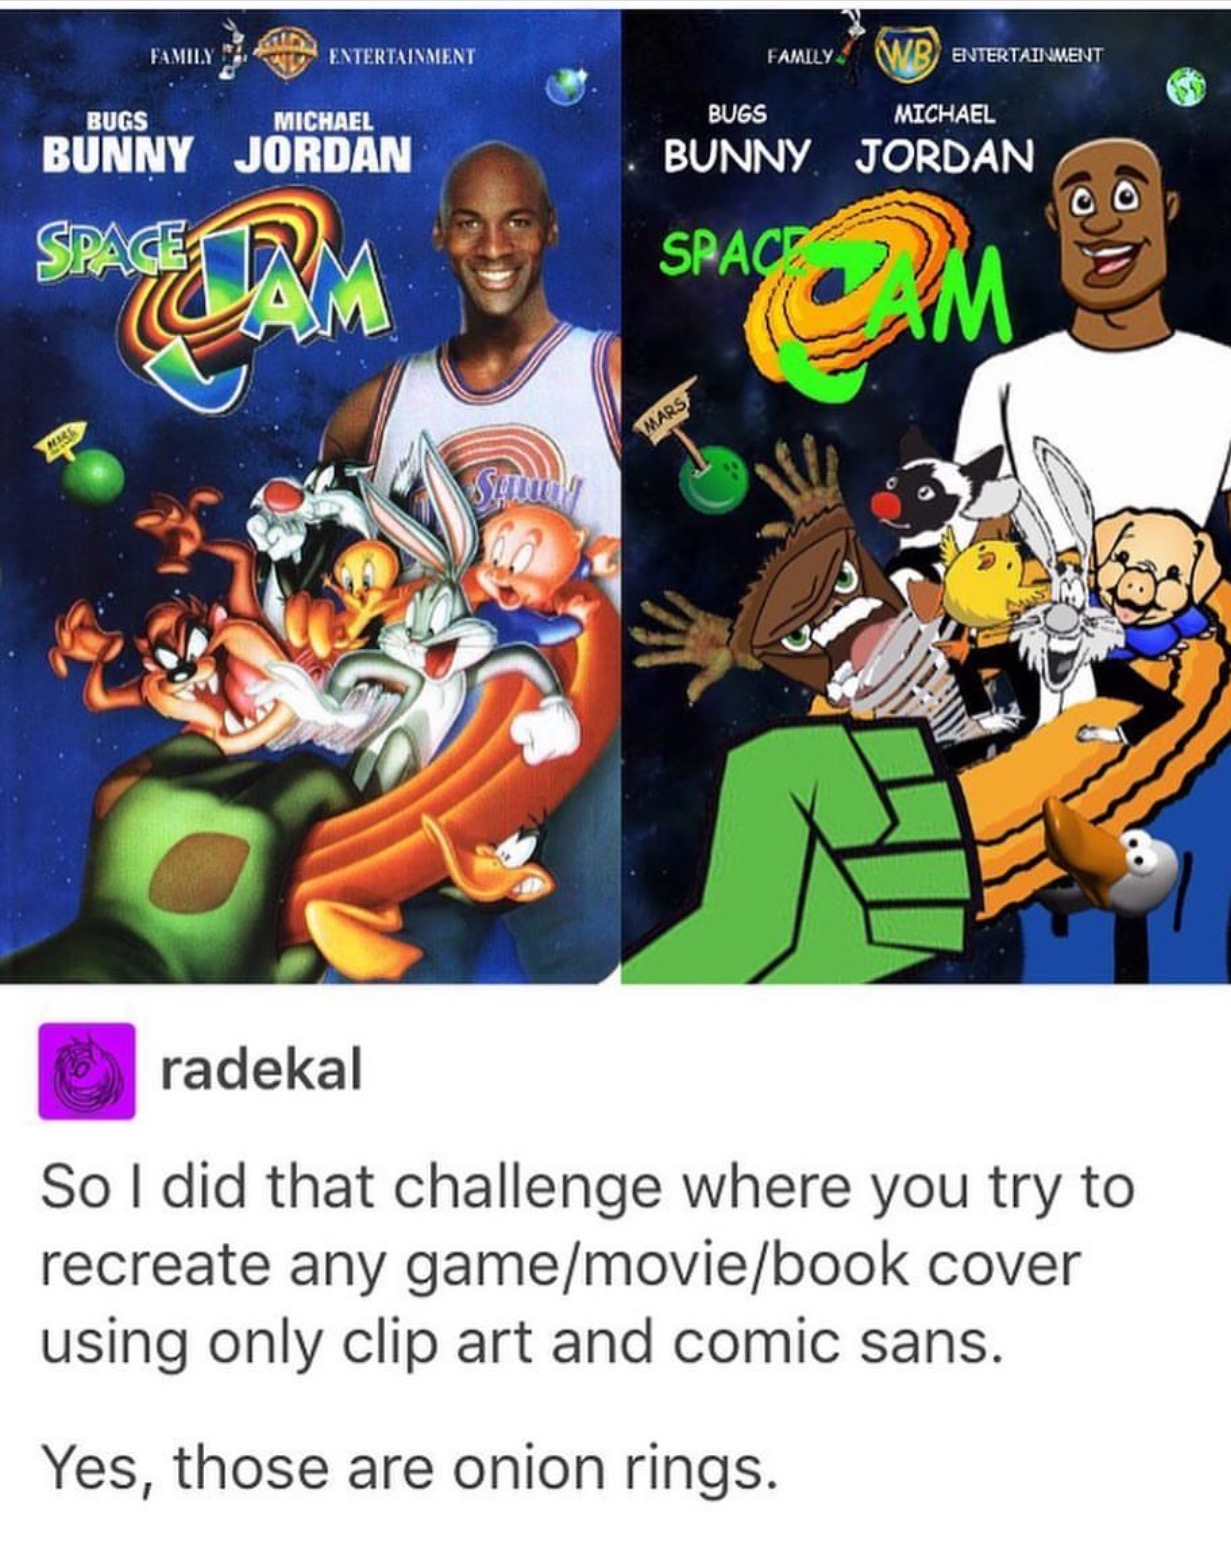 movie posters recreated with clipart - Family Entertainment Family Entertainment Bugs Bugs Michael Michael Bunny Jordan Bunny. Jordan Space On Spaci Icam Mars radekal So I did that challenge where you try to recreate any gamemoviebook cover using only cli